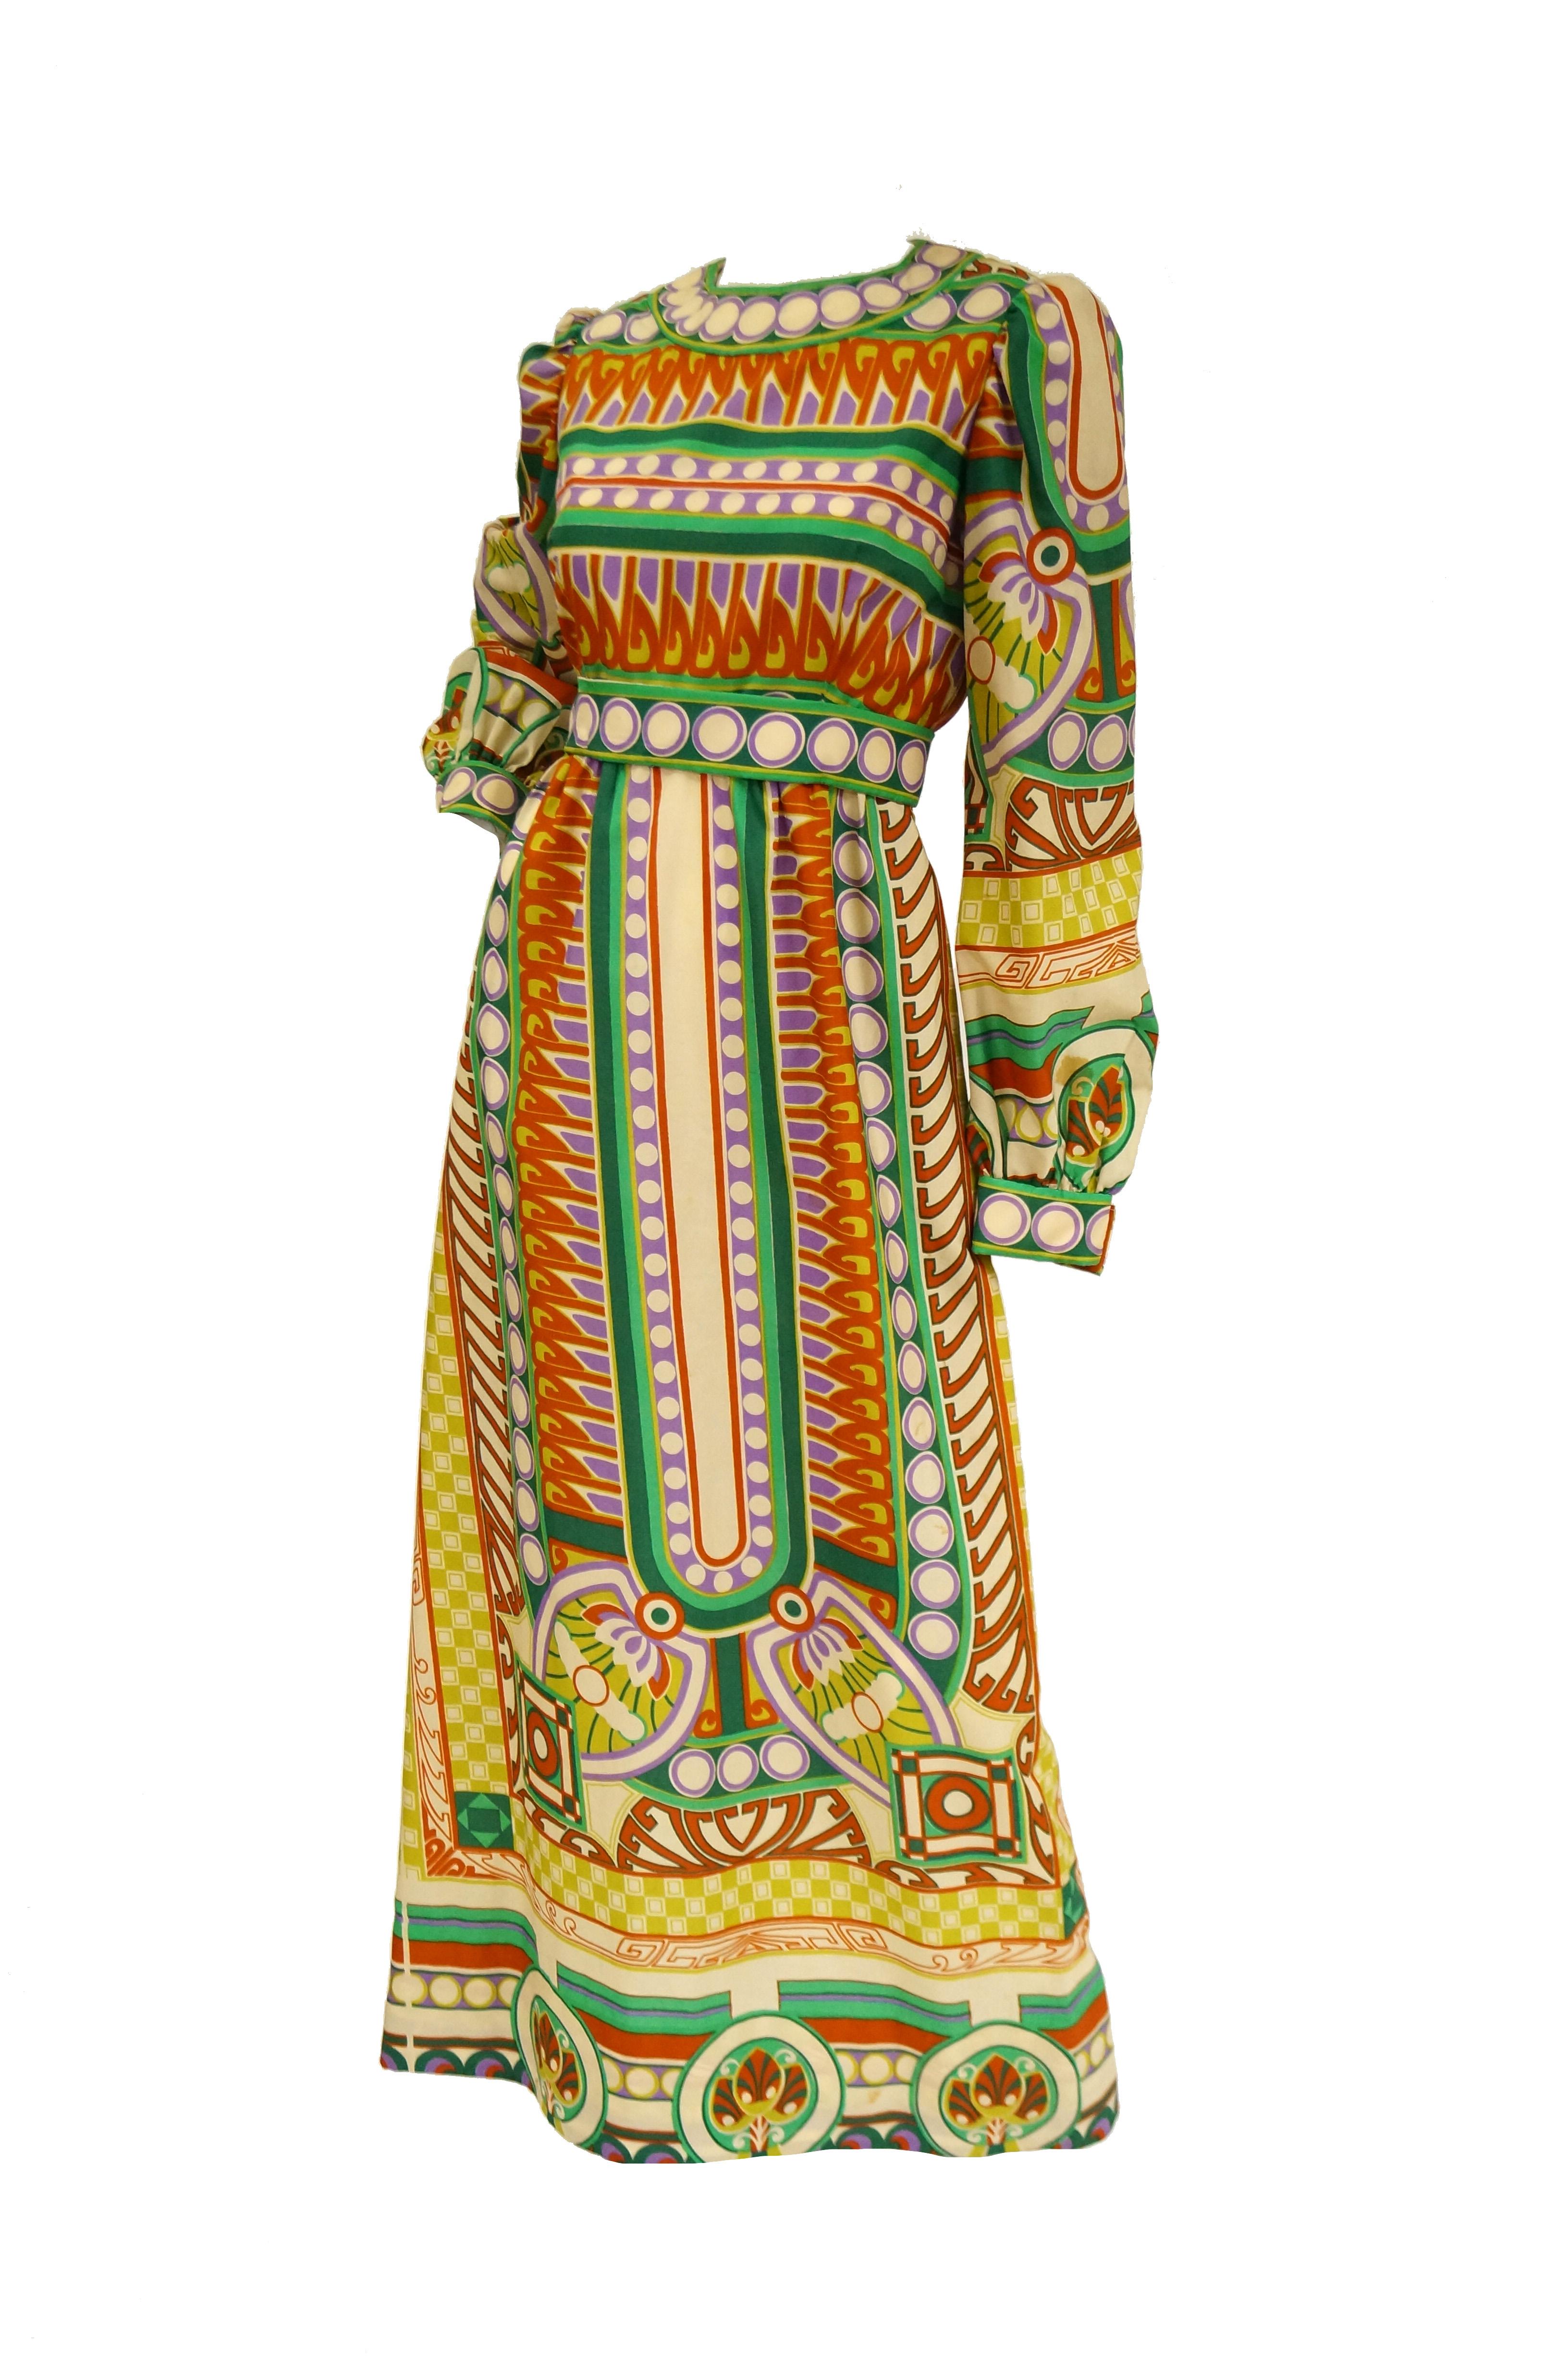 Beautiful intricately printed dress by Youssef Rizkallah for Malcolm Starr. The dress is maxi length, with an A - Line silhouette, long bishop sleeves with a wide cuff, a fitted bodice, and a wide jewel neckline. The dress is brilliant and colorful,